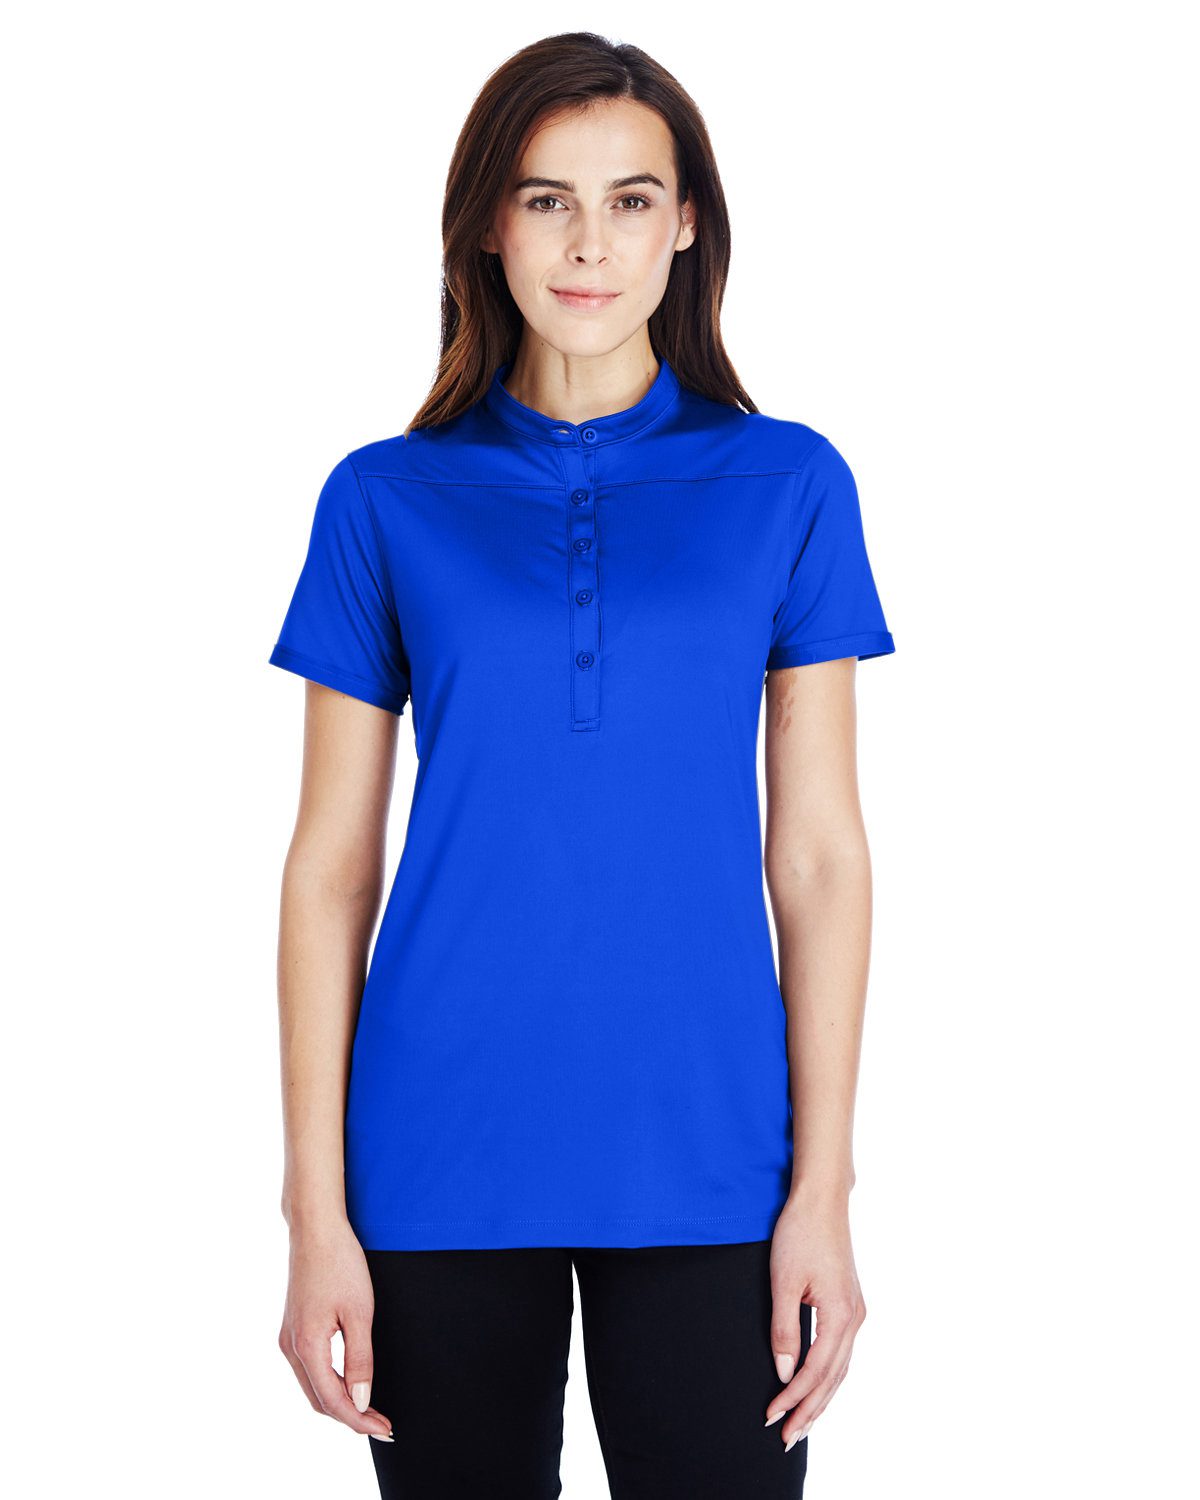 Under Armour Ladies' Corporate Performance Polo 2.0 #1317218